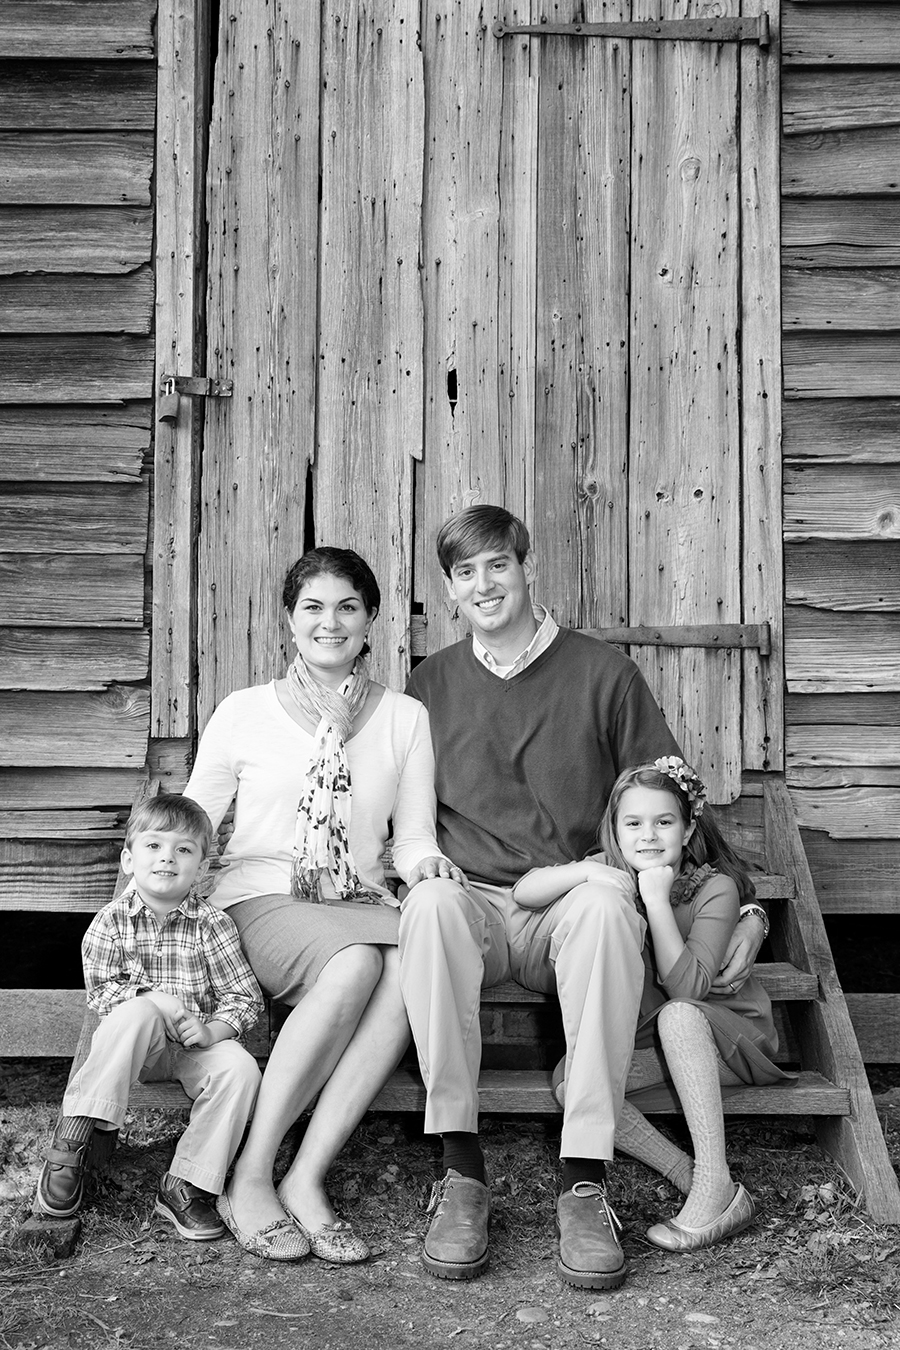 Family Photo Session with the Comstock Family - Image Property of www.j-dphoto.com